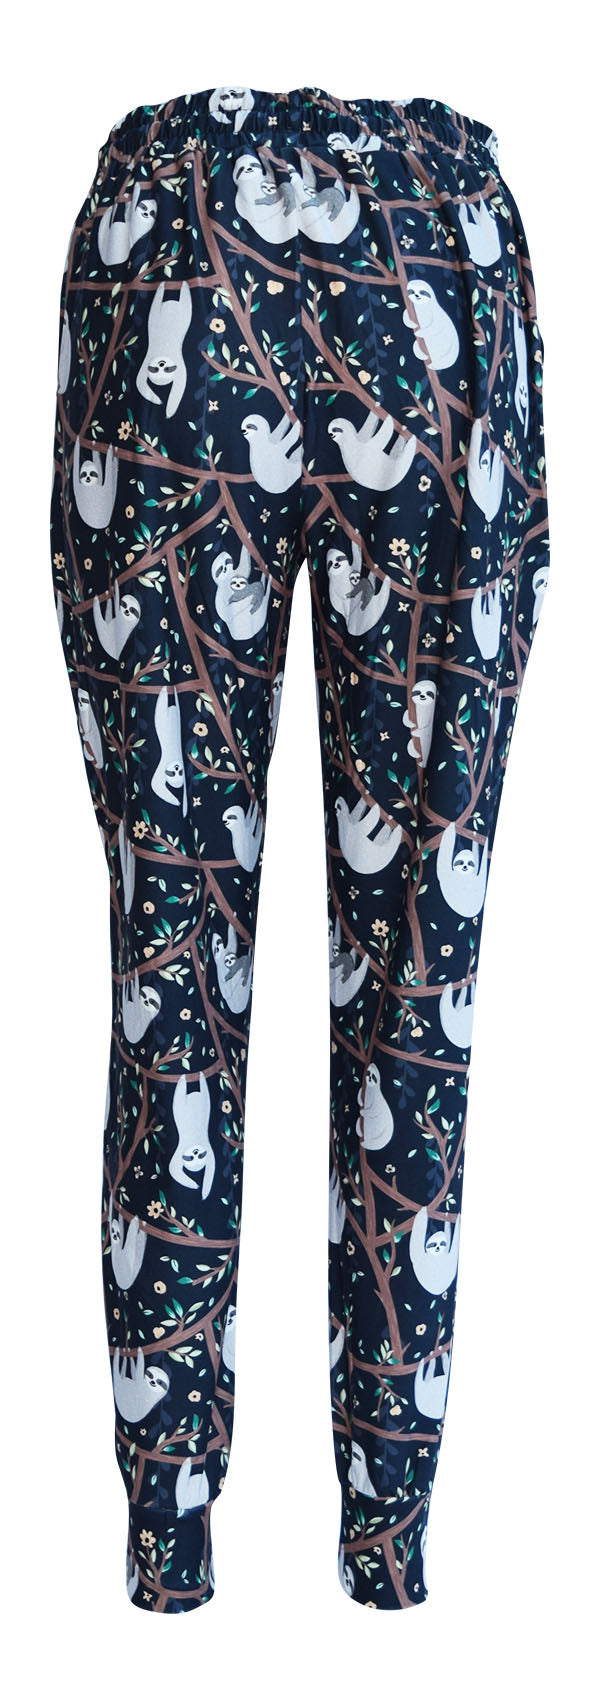 Lazy Days Sloth Lejoggers-Joggers